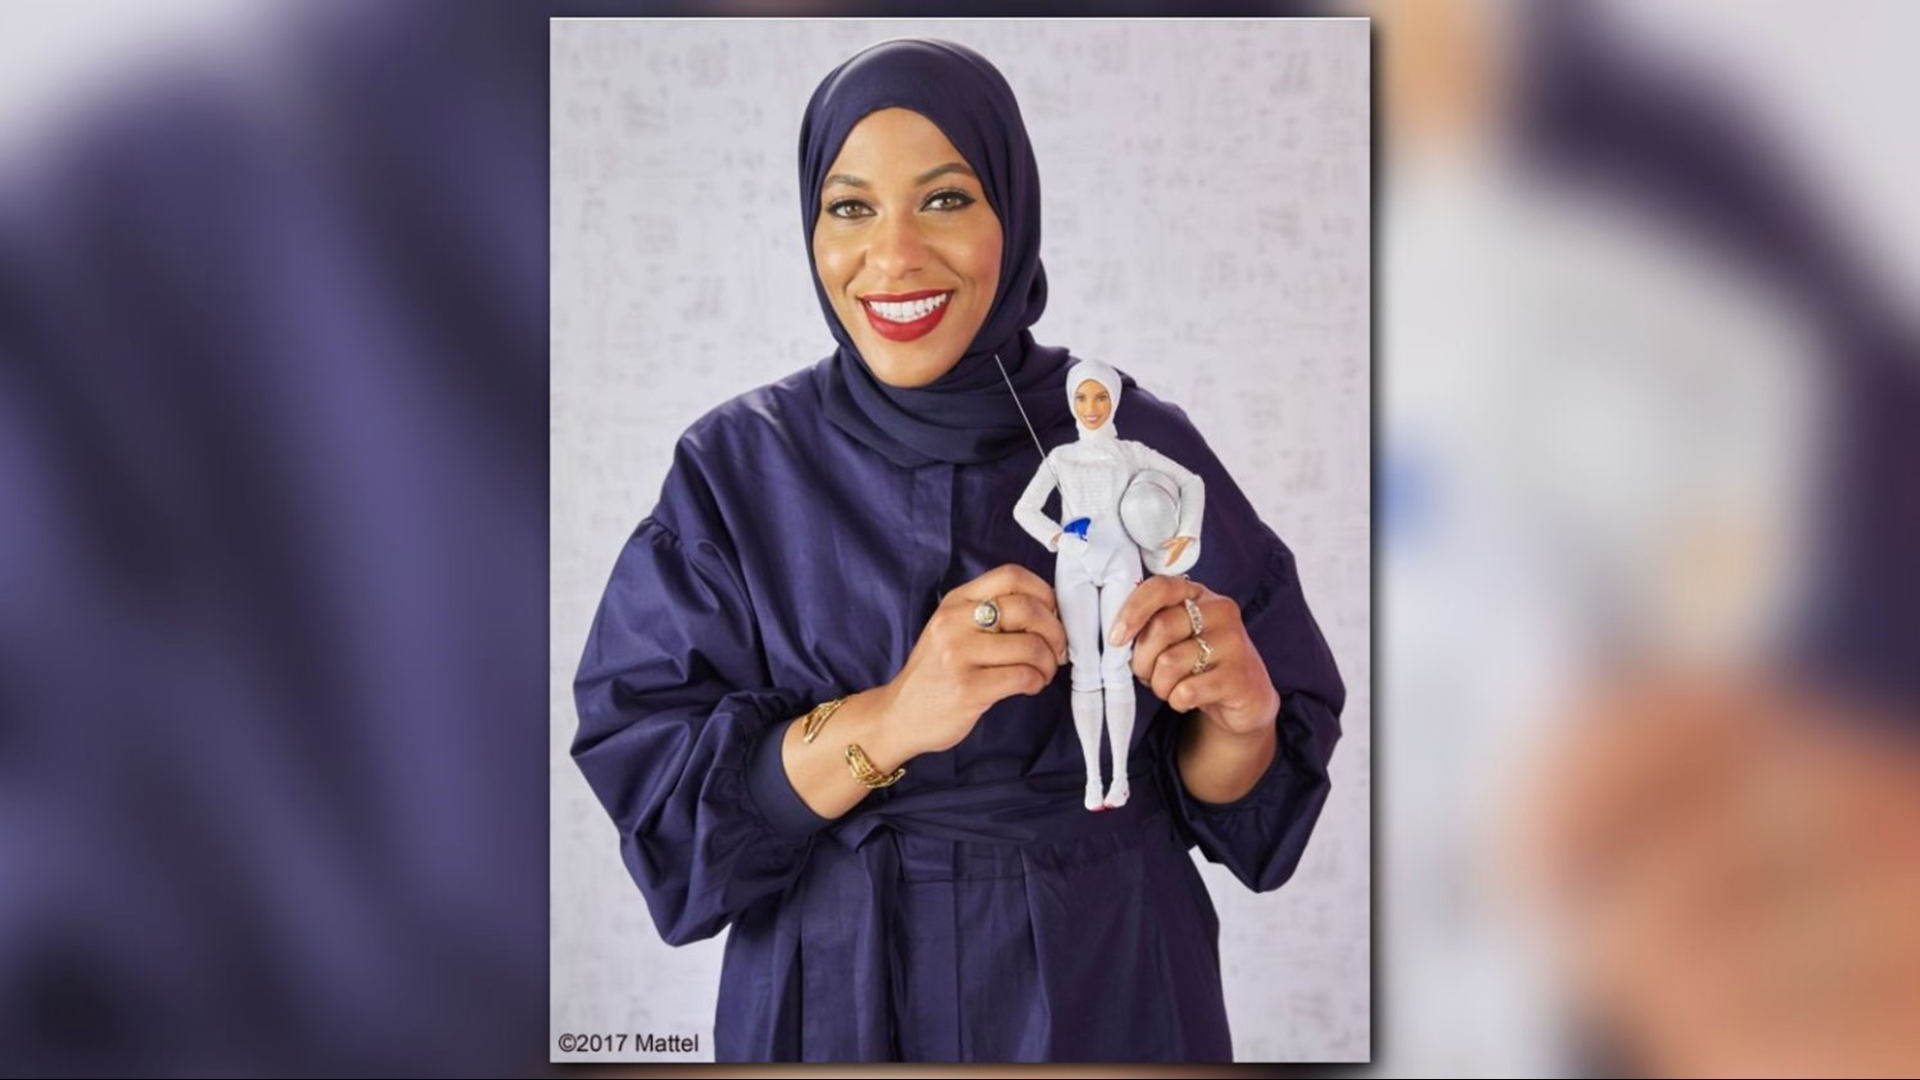 American fencer Ibtihaj Muhammad is a trailblazer for Muslims in America. The Duke graduate won bronze in Rio 2016 and became the first U.S. athlete to wear a hijab.